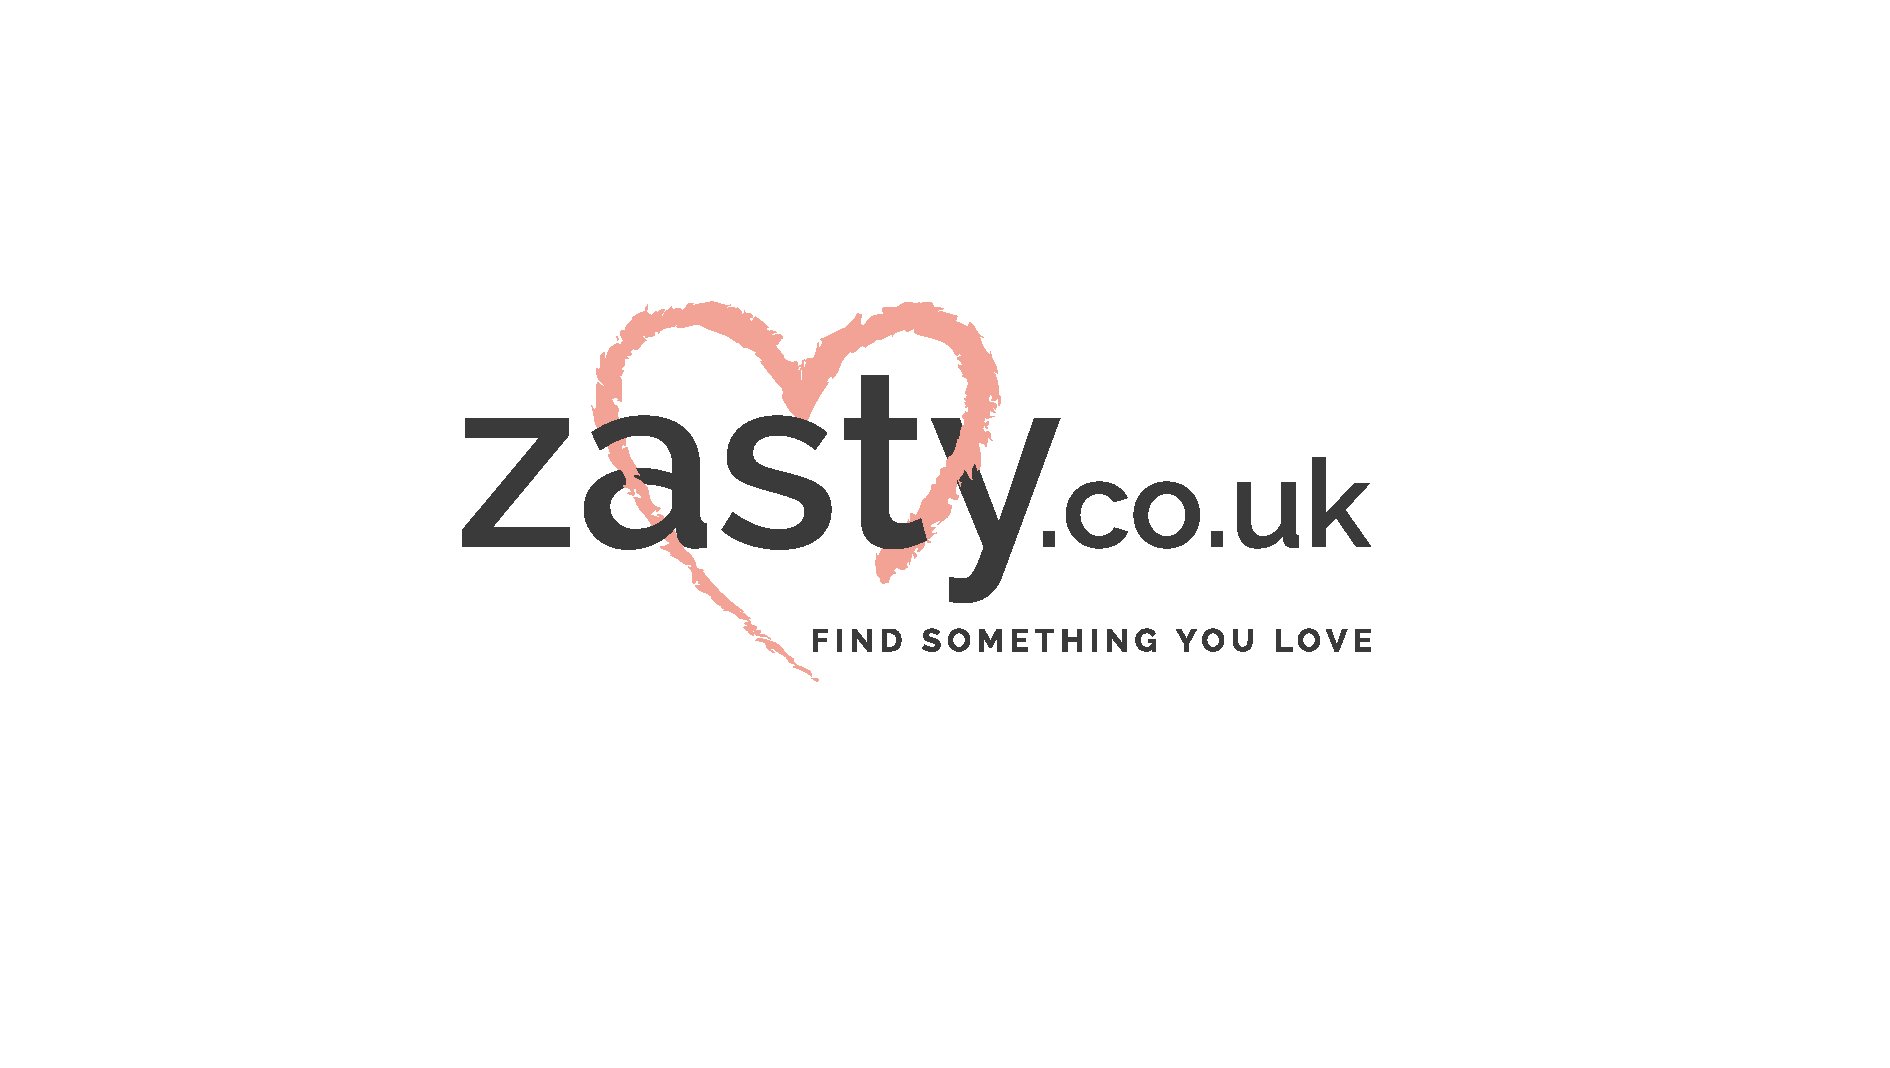 We are an exciting new multi-vendor marketplace connecting creators of unique, hand-made, beautiful items with buyers from all over the UK ❤️❤️❤️